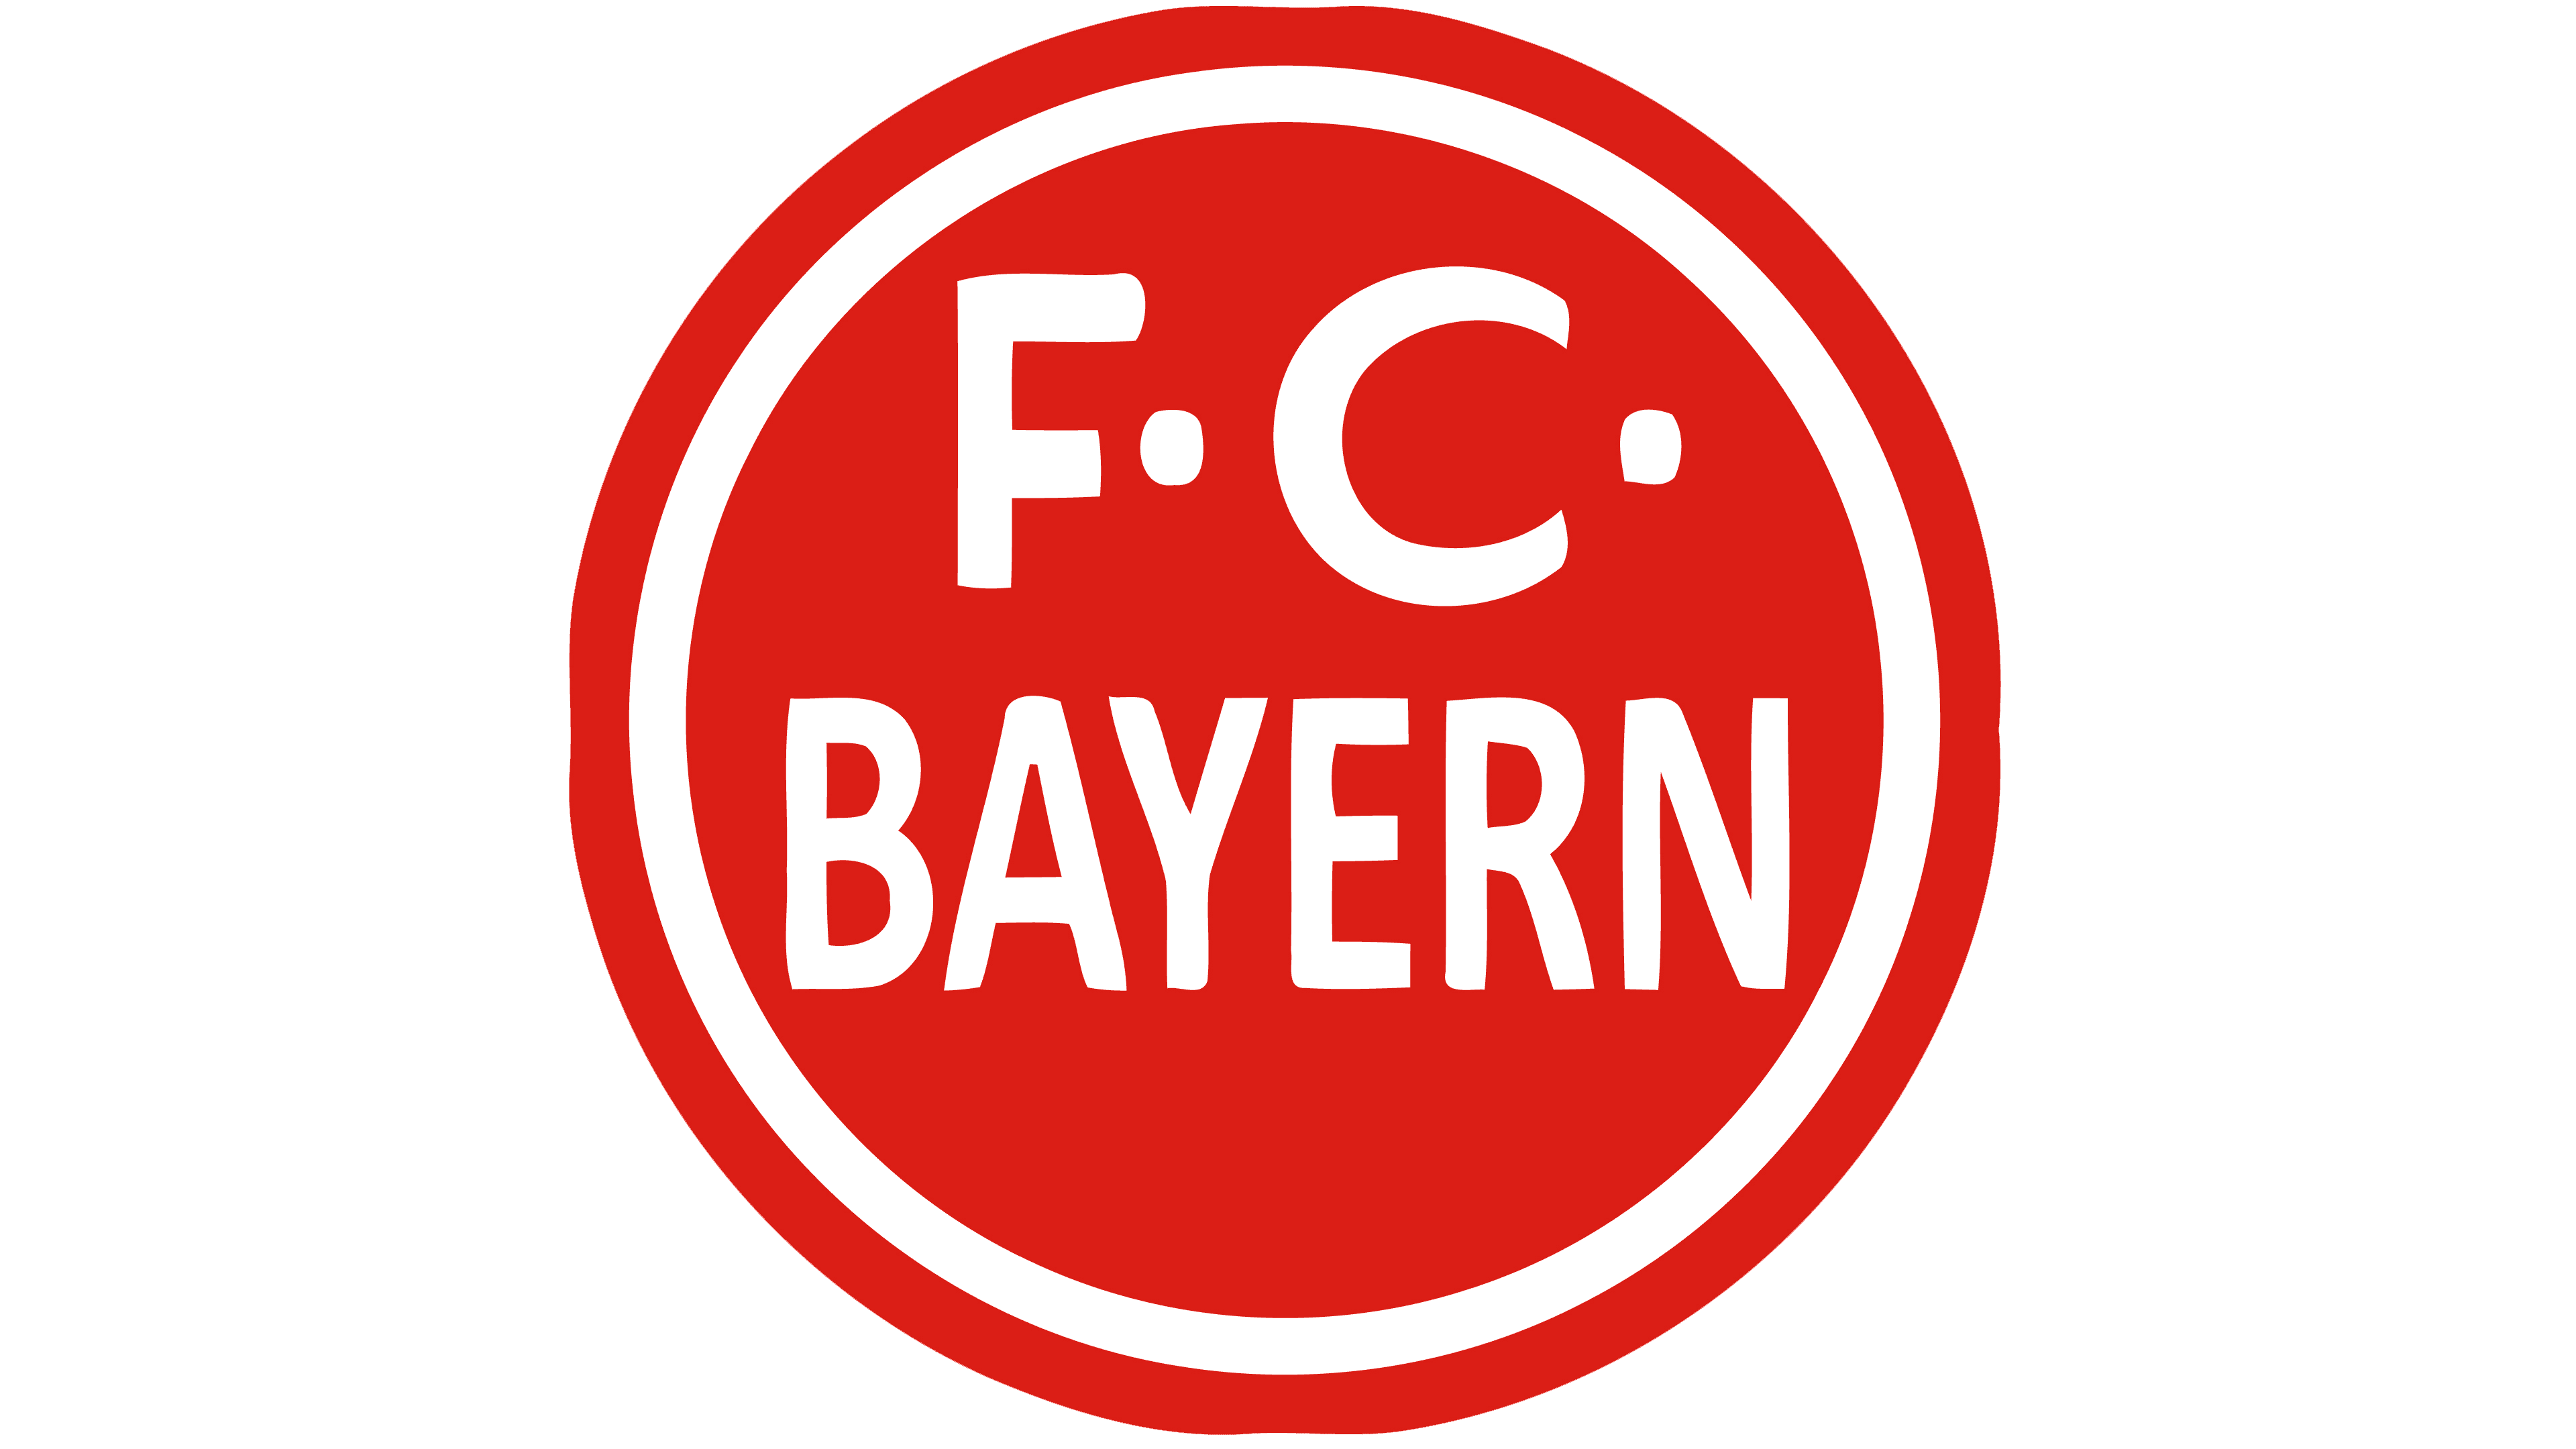 Fc Bayern Munchen Logo The Most Famous Brands And Company Logos In The World